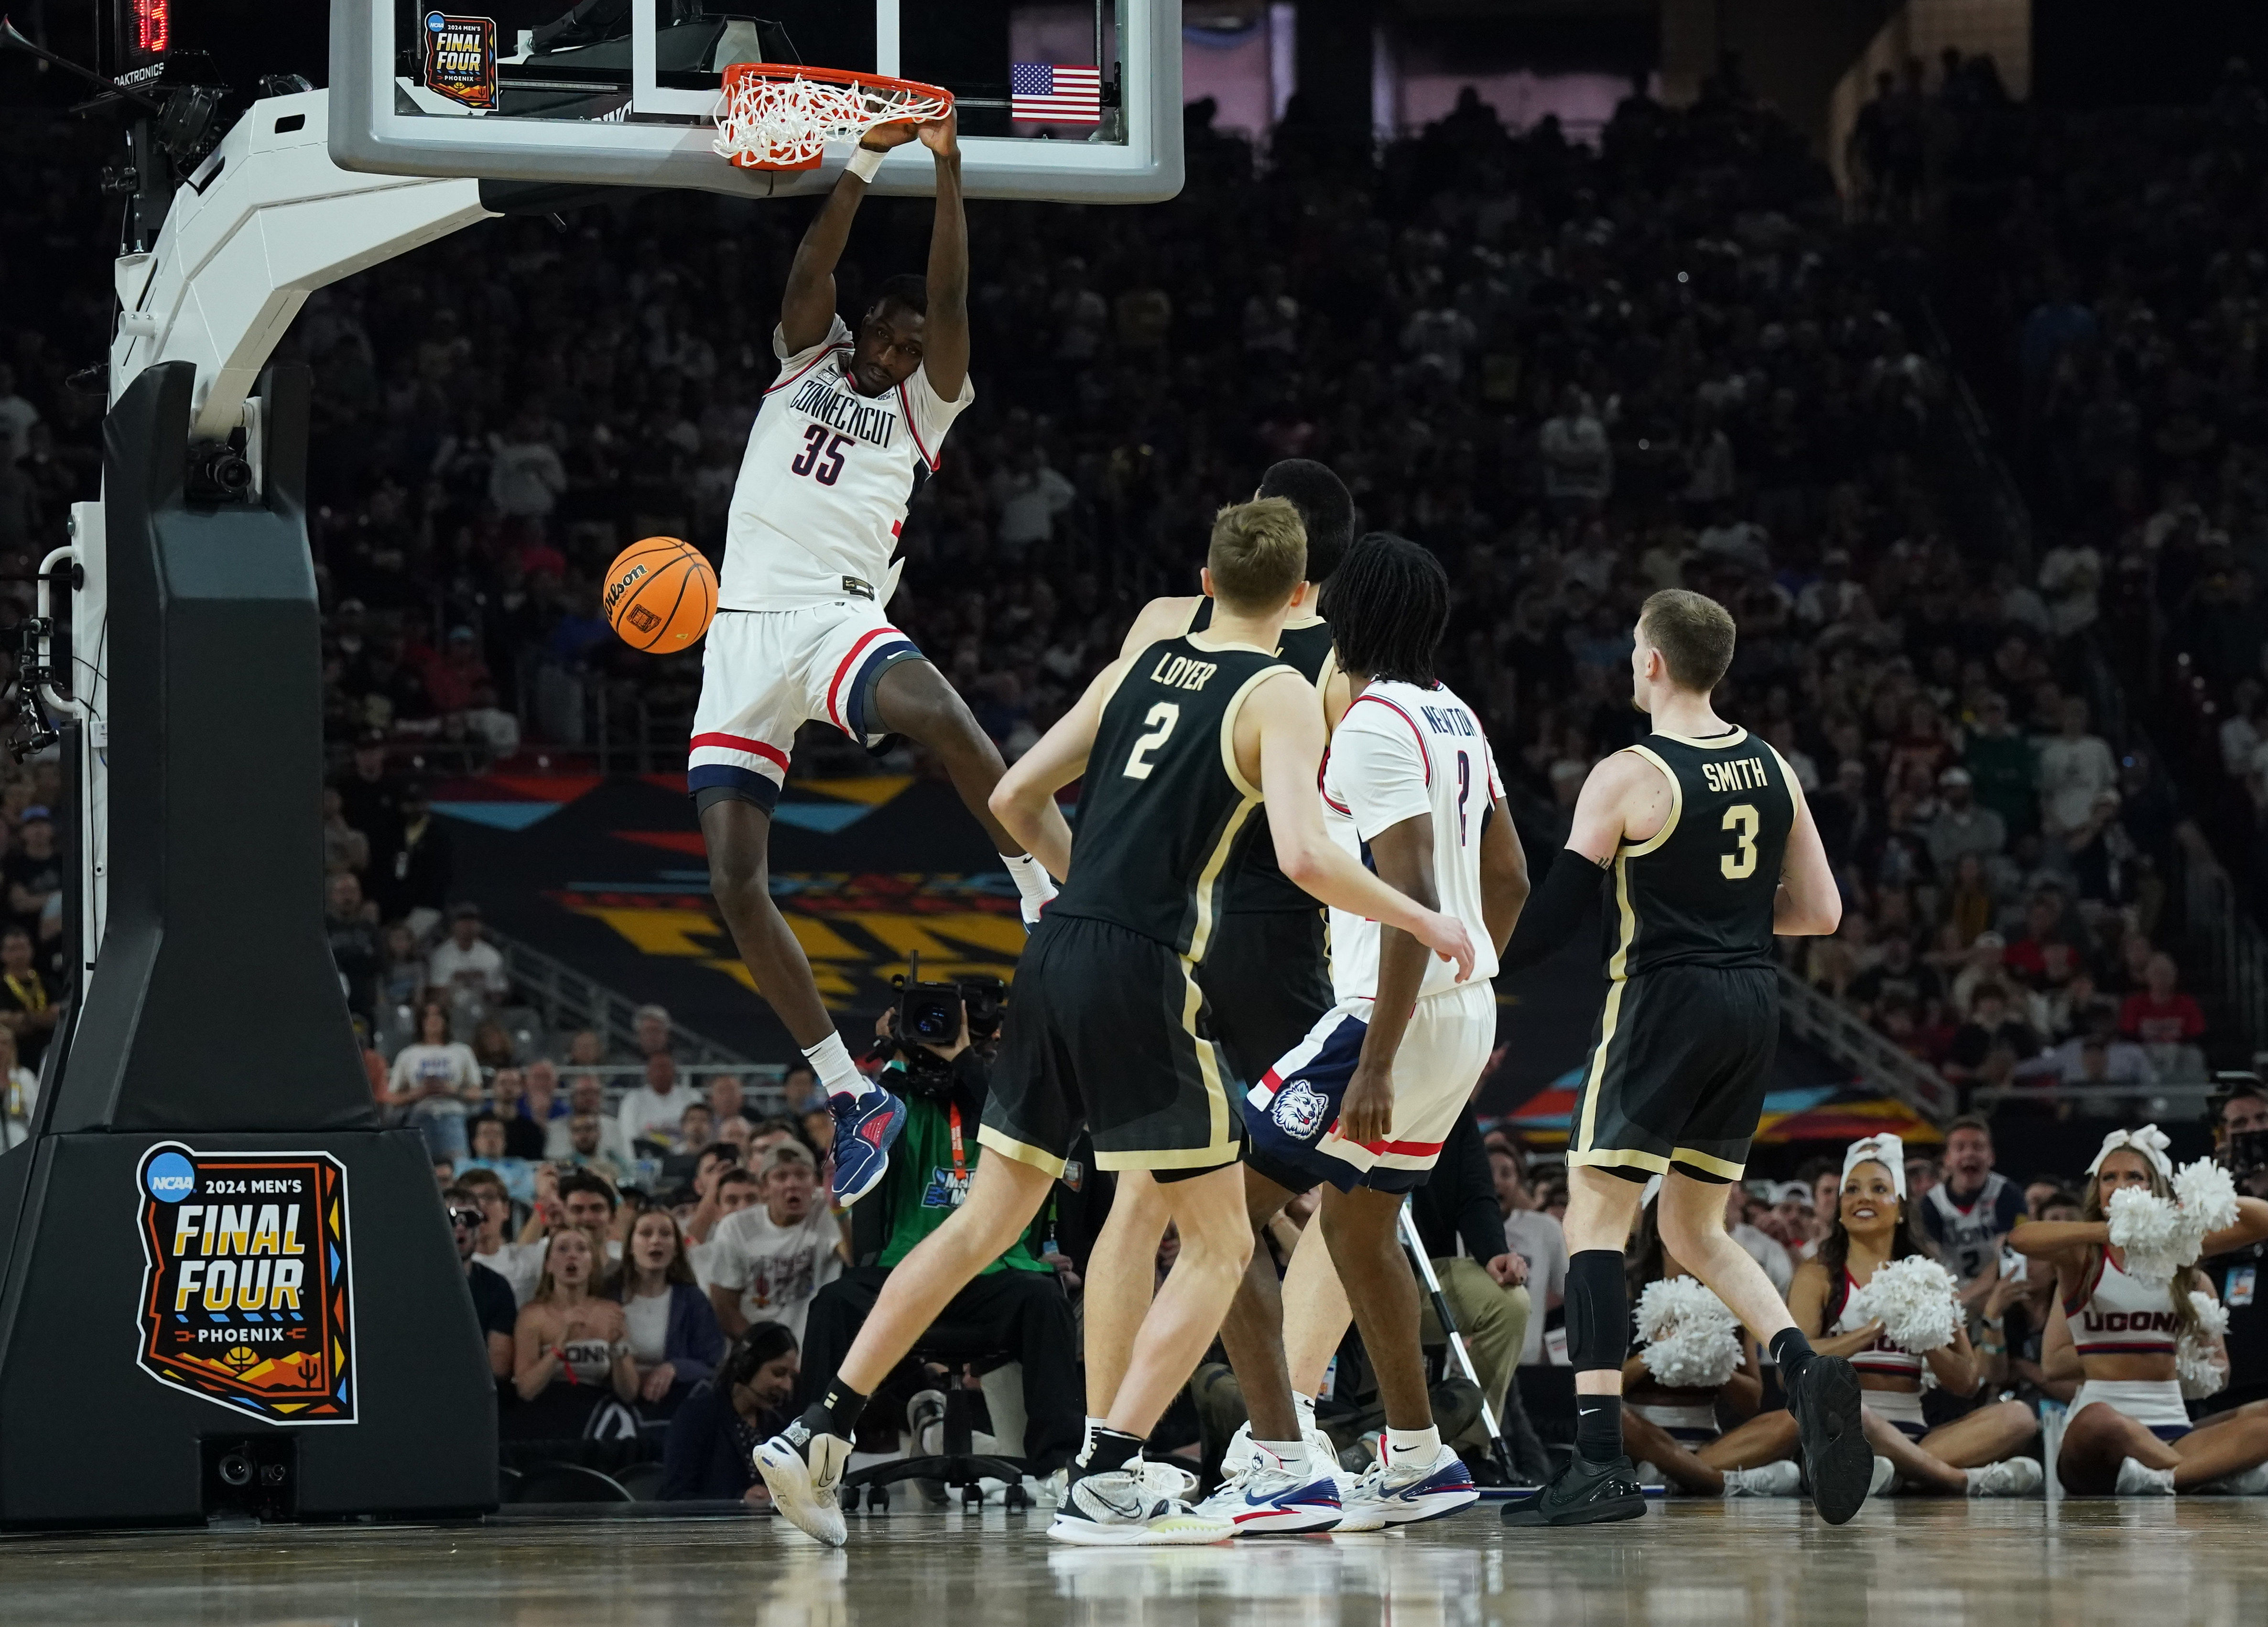 UConn forward Samson Johnson throws down a dunk in the national championship game. He&#039;s one of the most significant expected returnees next season for the Huskies.